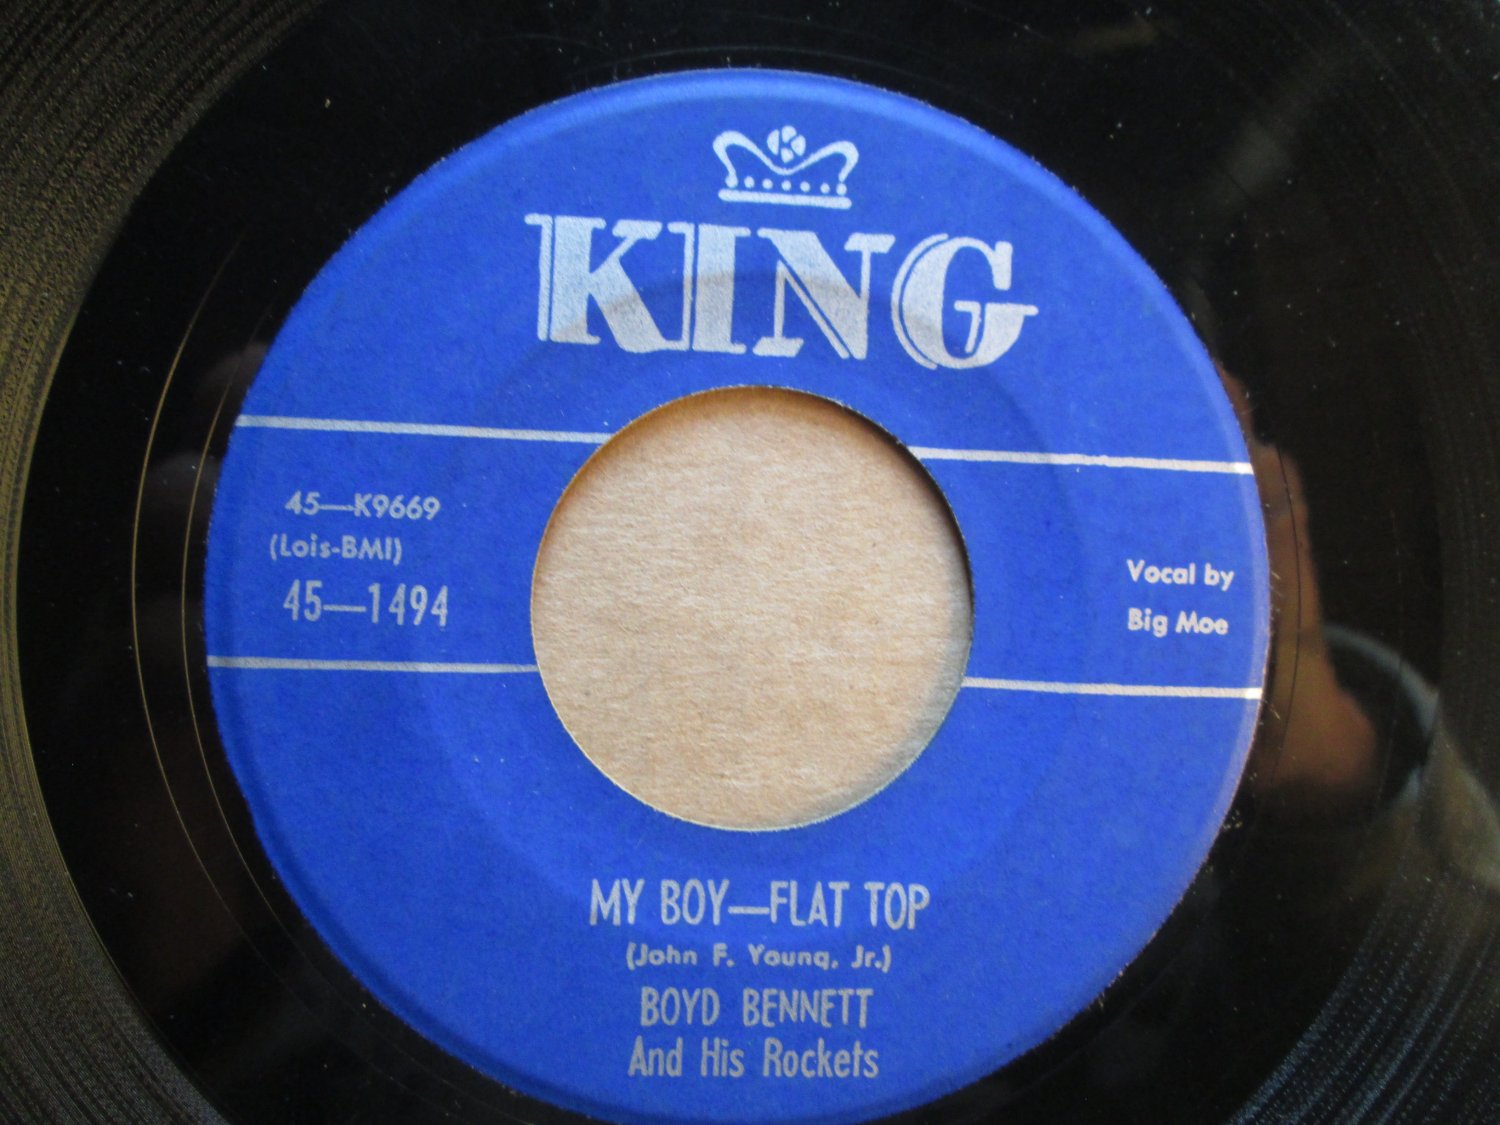 *Boyd Bennett And His Rockets*   My Boy - Flat Top / Banjo Rock And Roll 1955  7" Vinyl Record